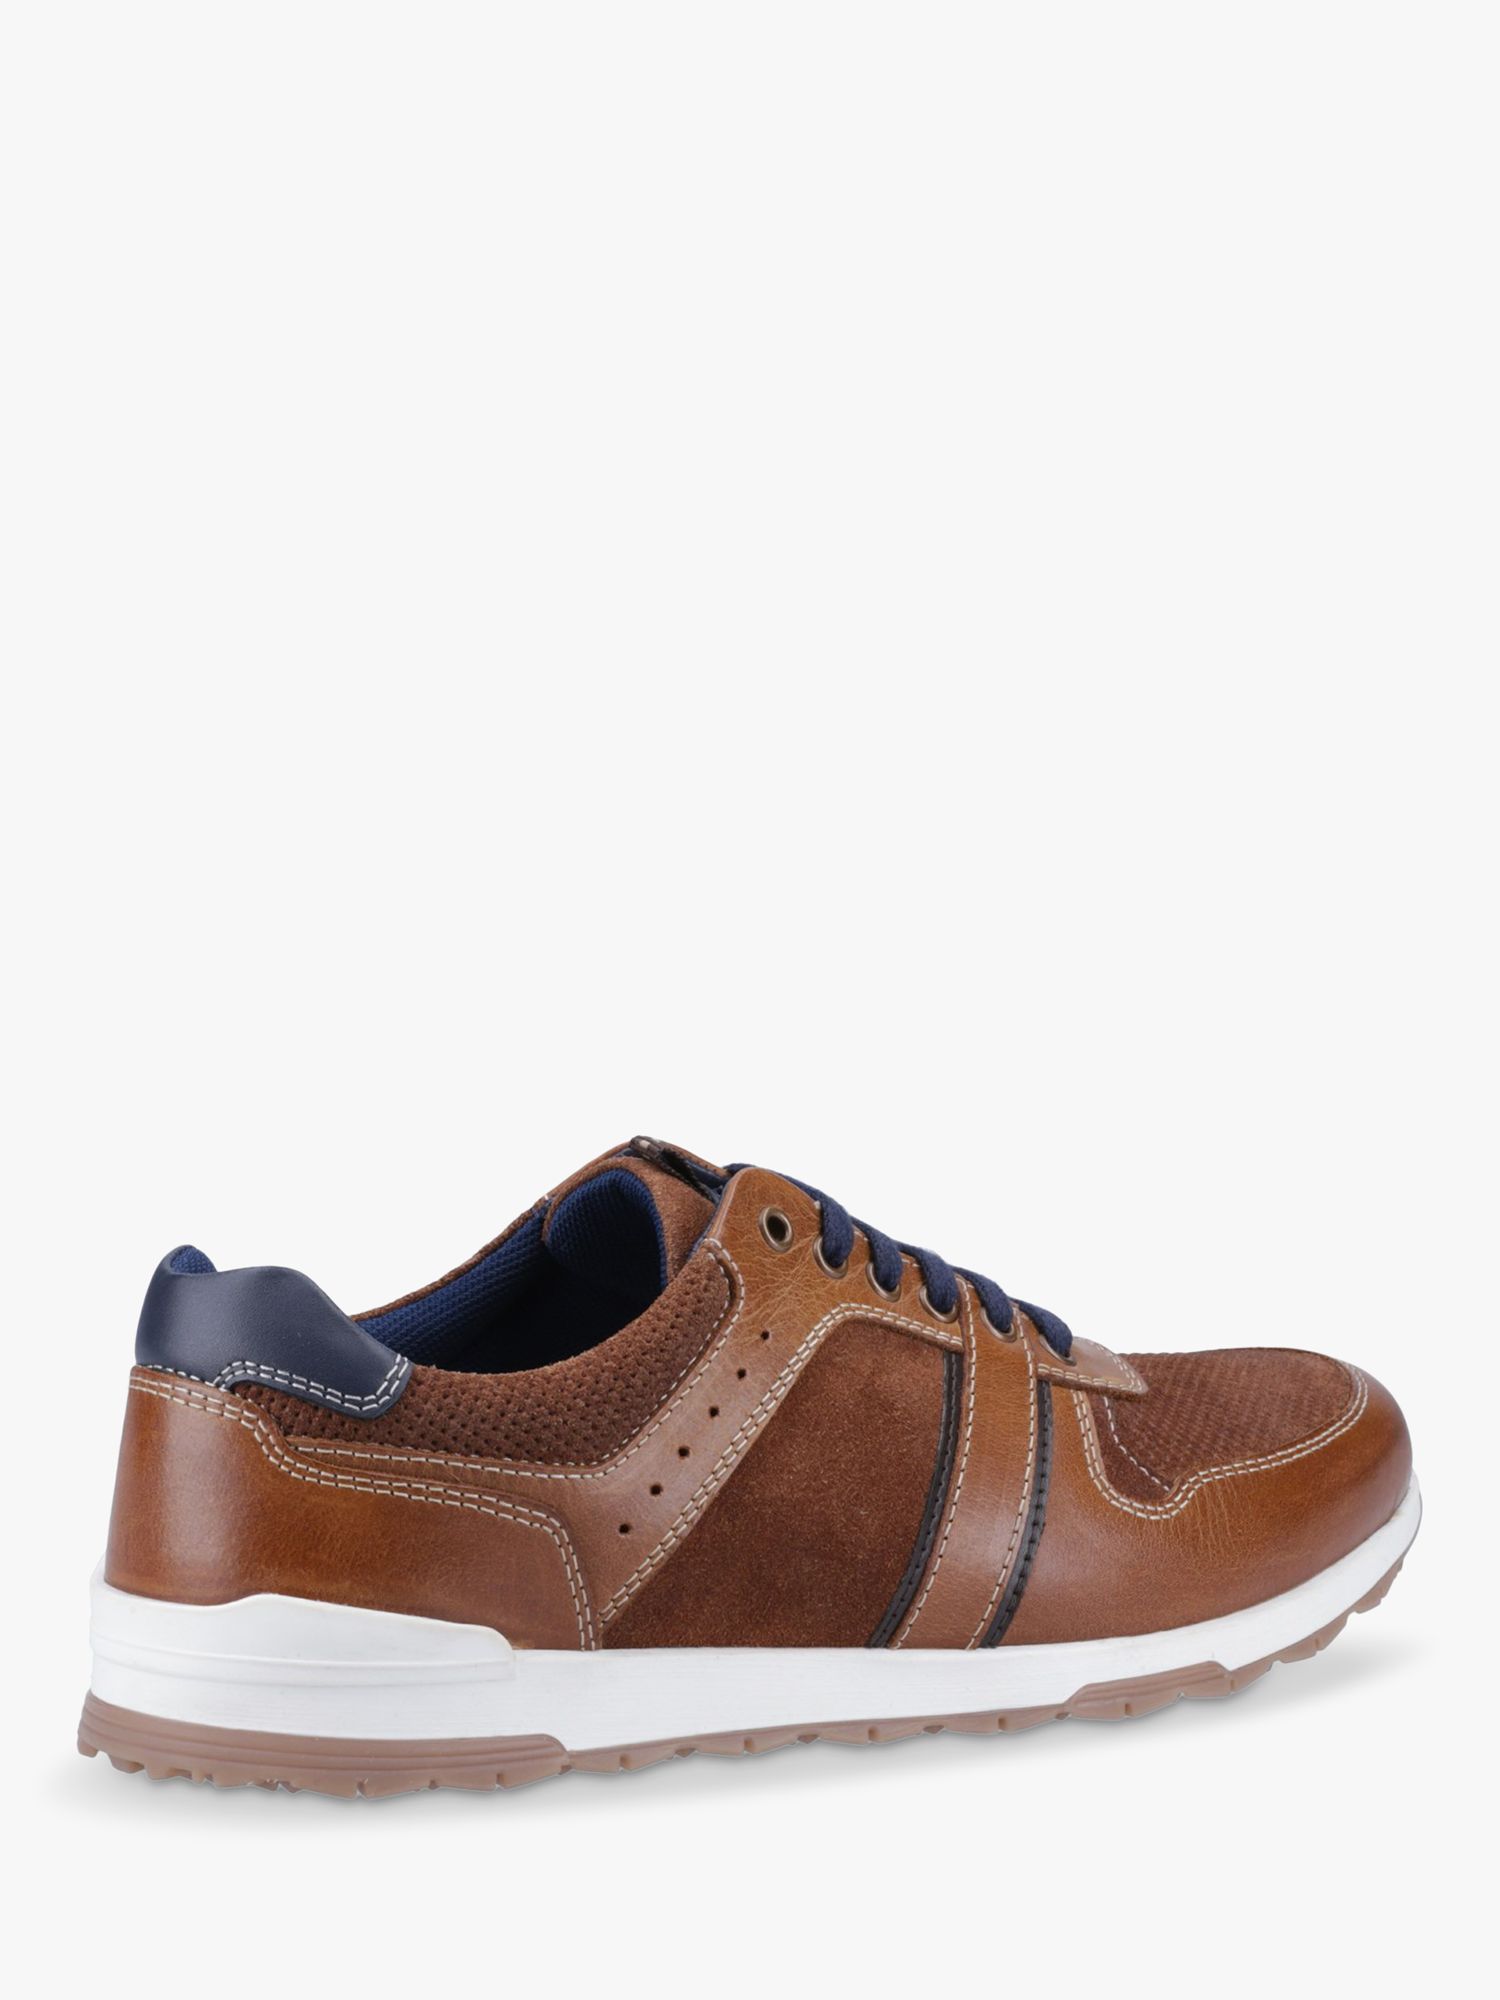 Hush Puppies Christopher Leather Trainers, Tan, 6